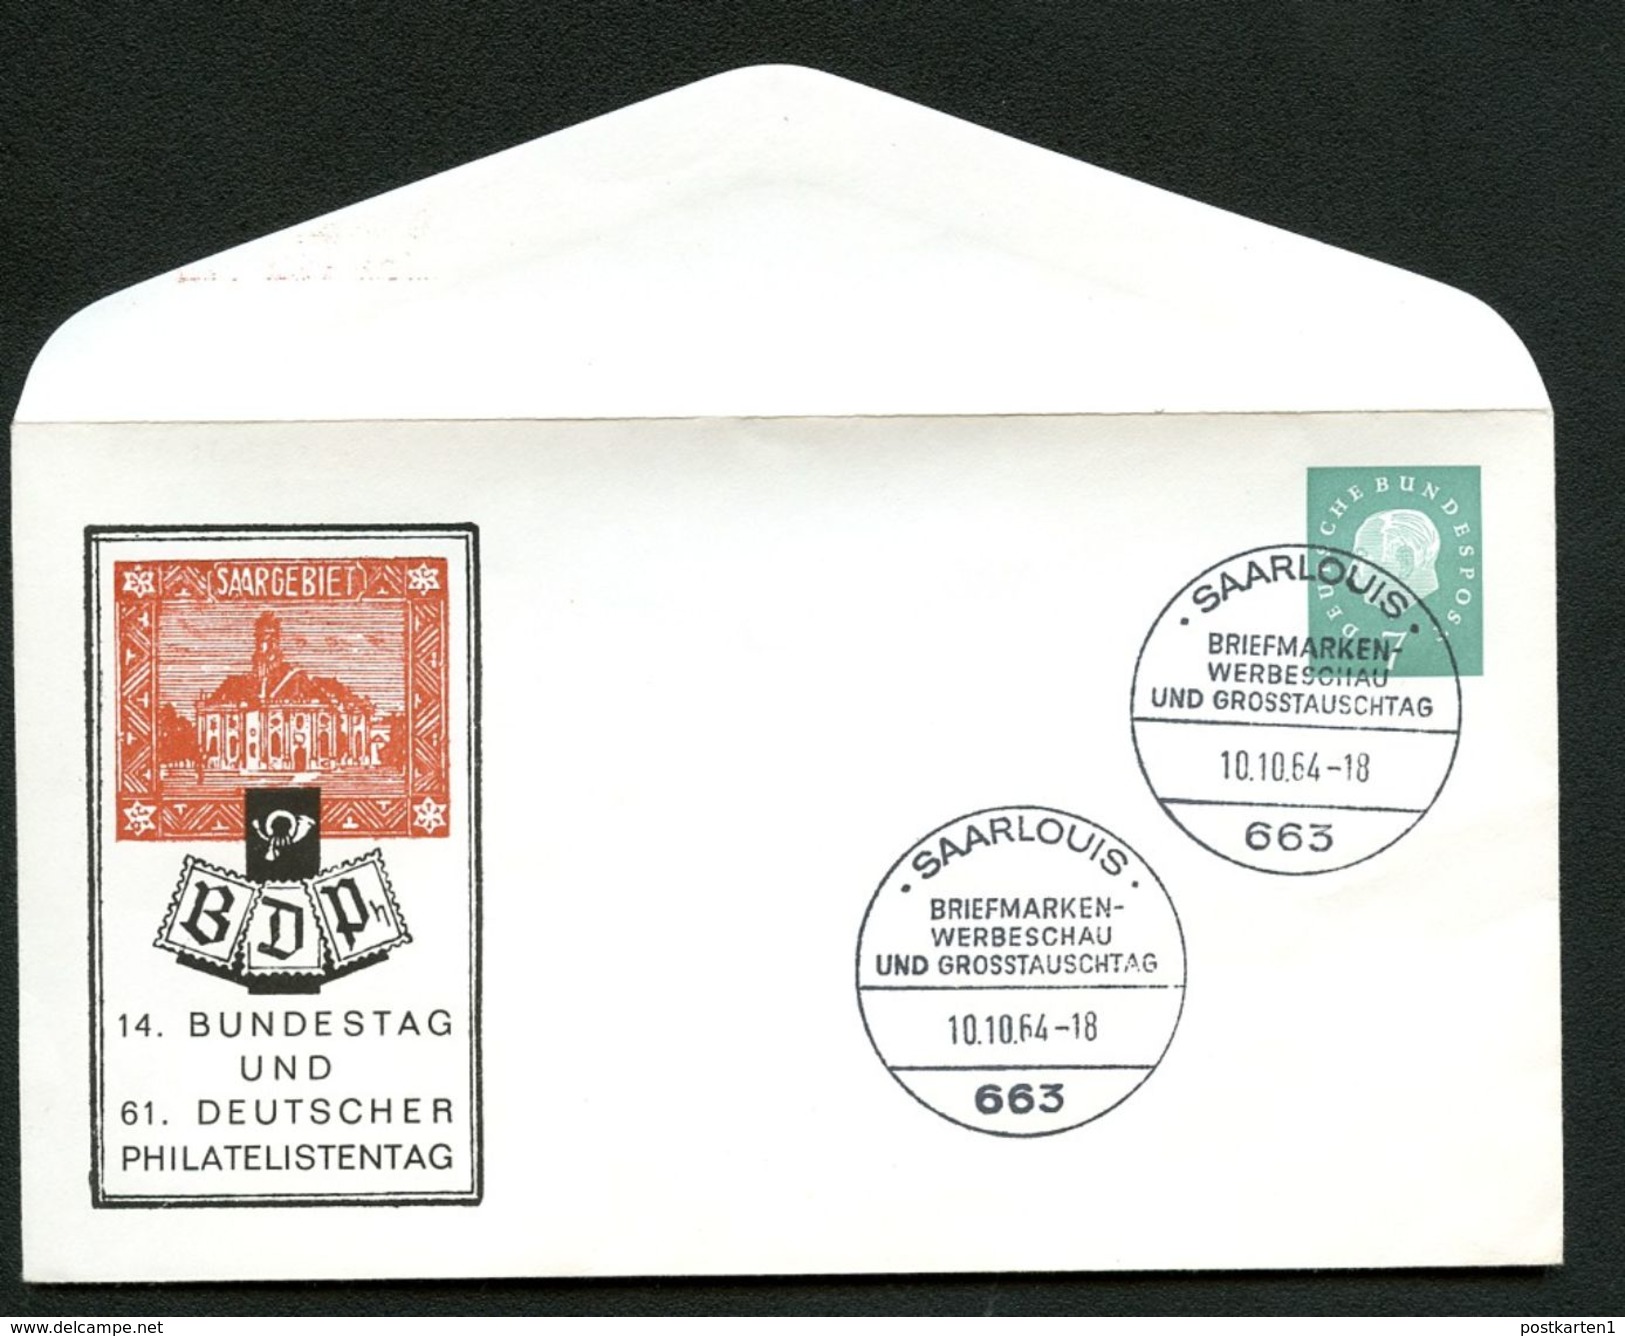 Bund PU13 B1/001a-b Privat-Umschläge BUNDESTAG BDPH Sost. 1960  NGK 28,00 € - Private Covers - Used